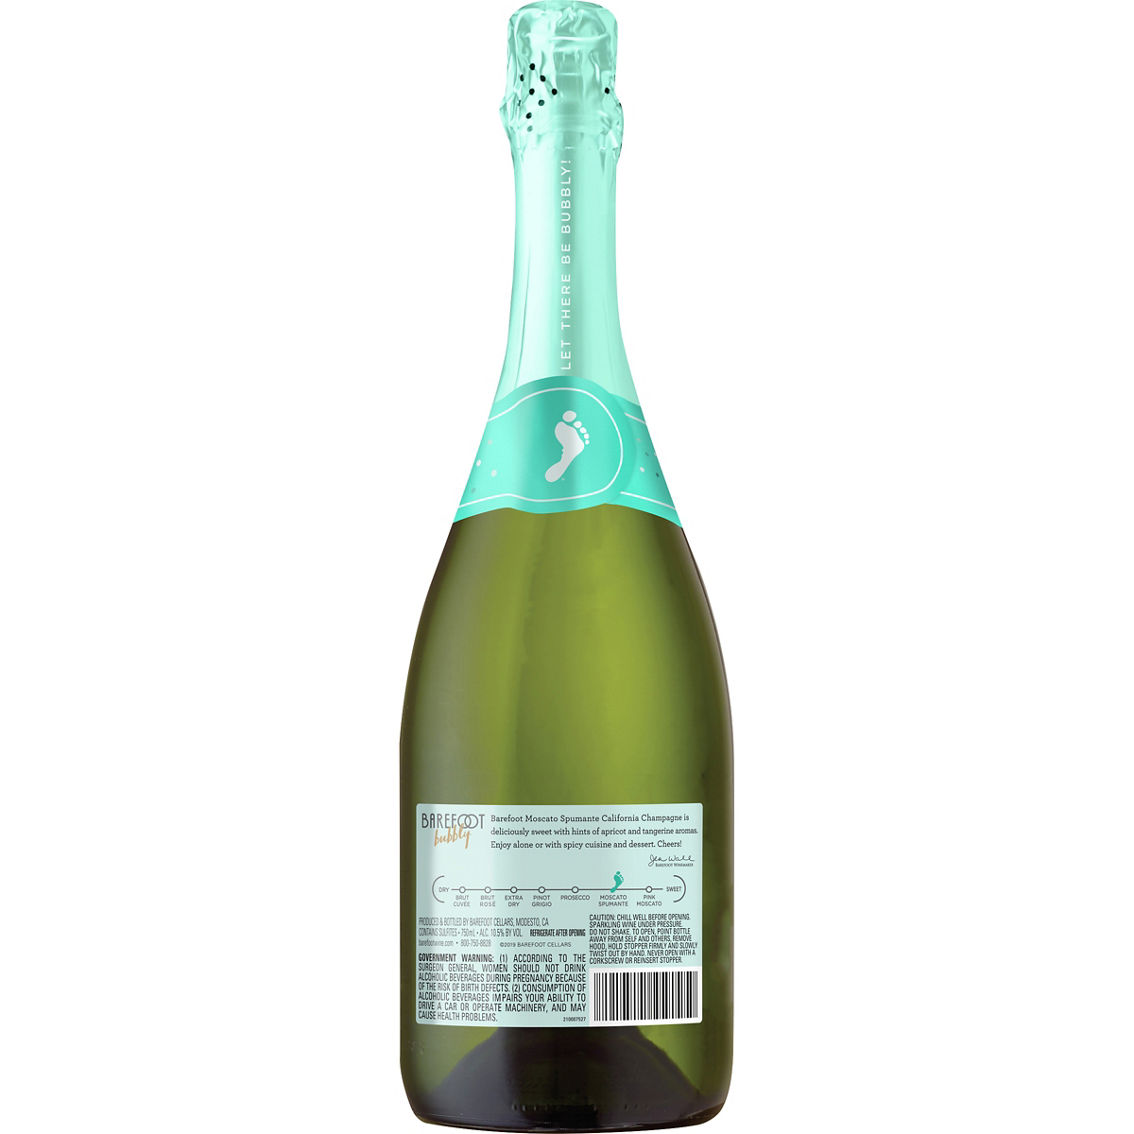 Barefoot Bubbly Moscato Spumante Champagne 750ml - Image 2 of 2